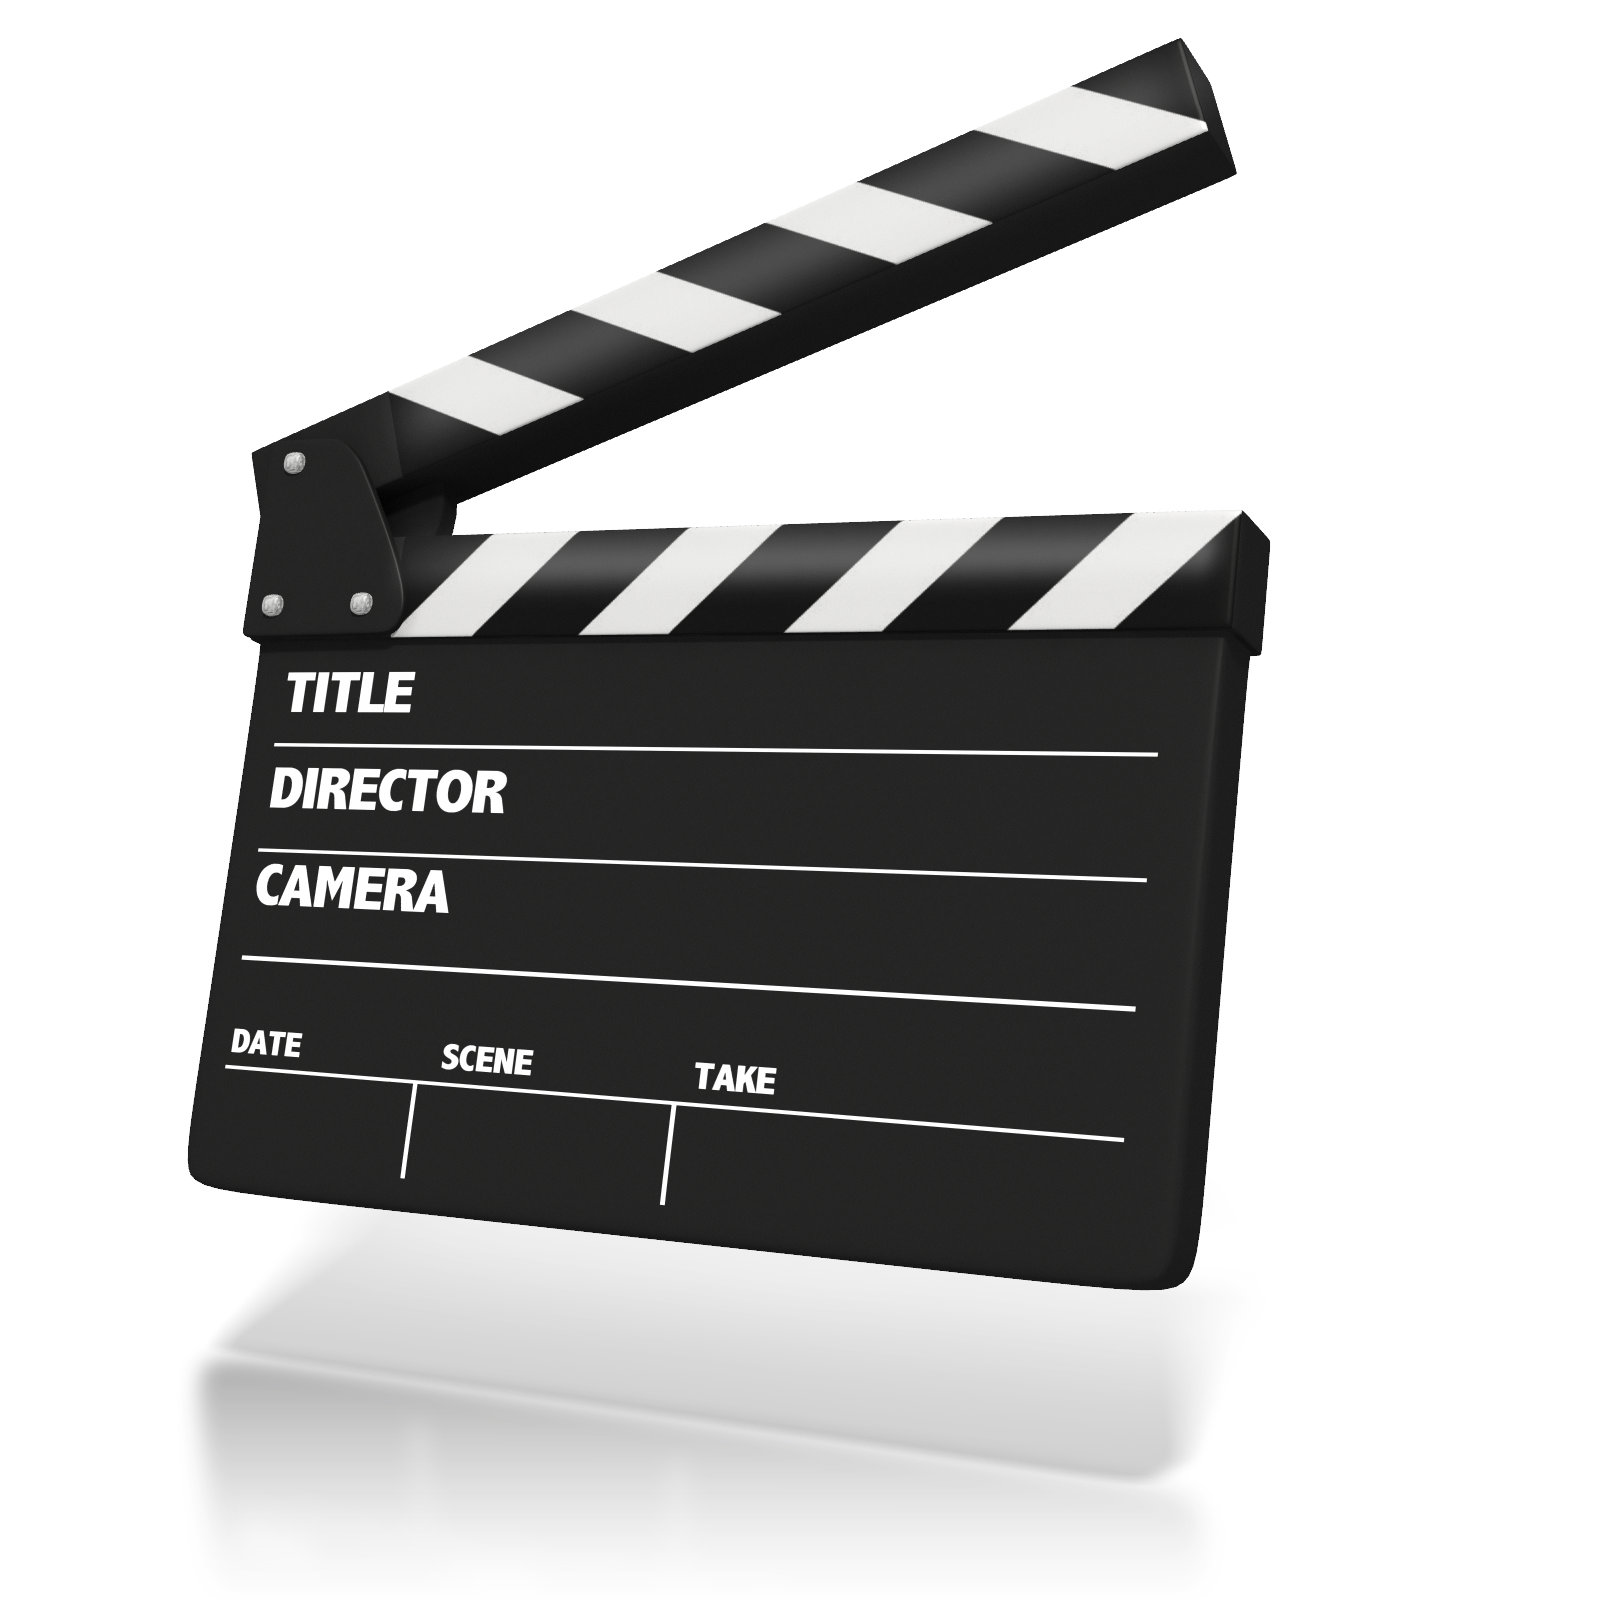 Download Theatre Movie Clapping Animation Presentation Clapperboard.